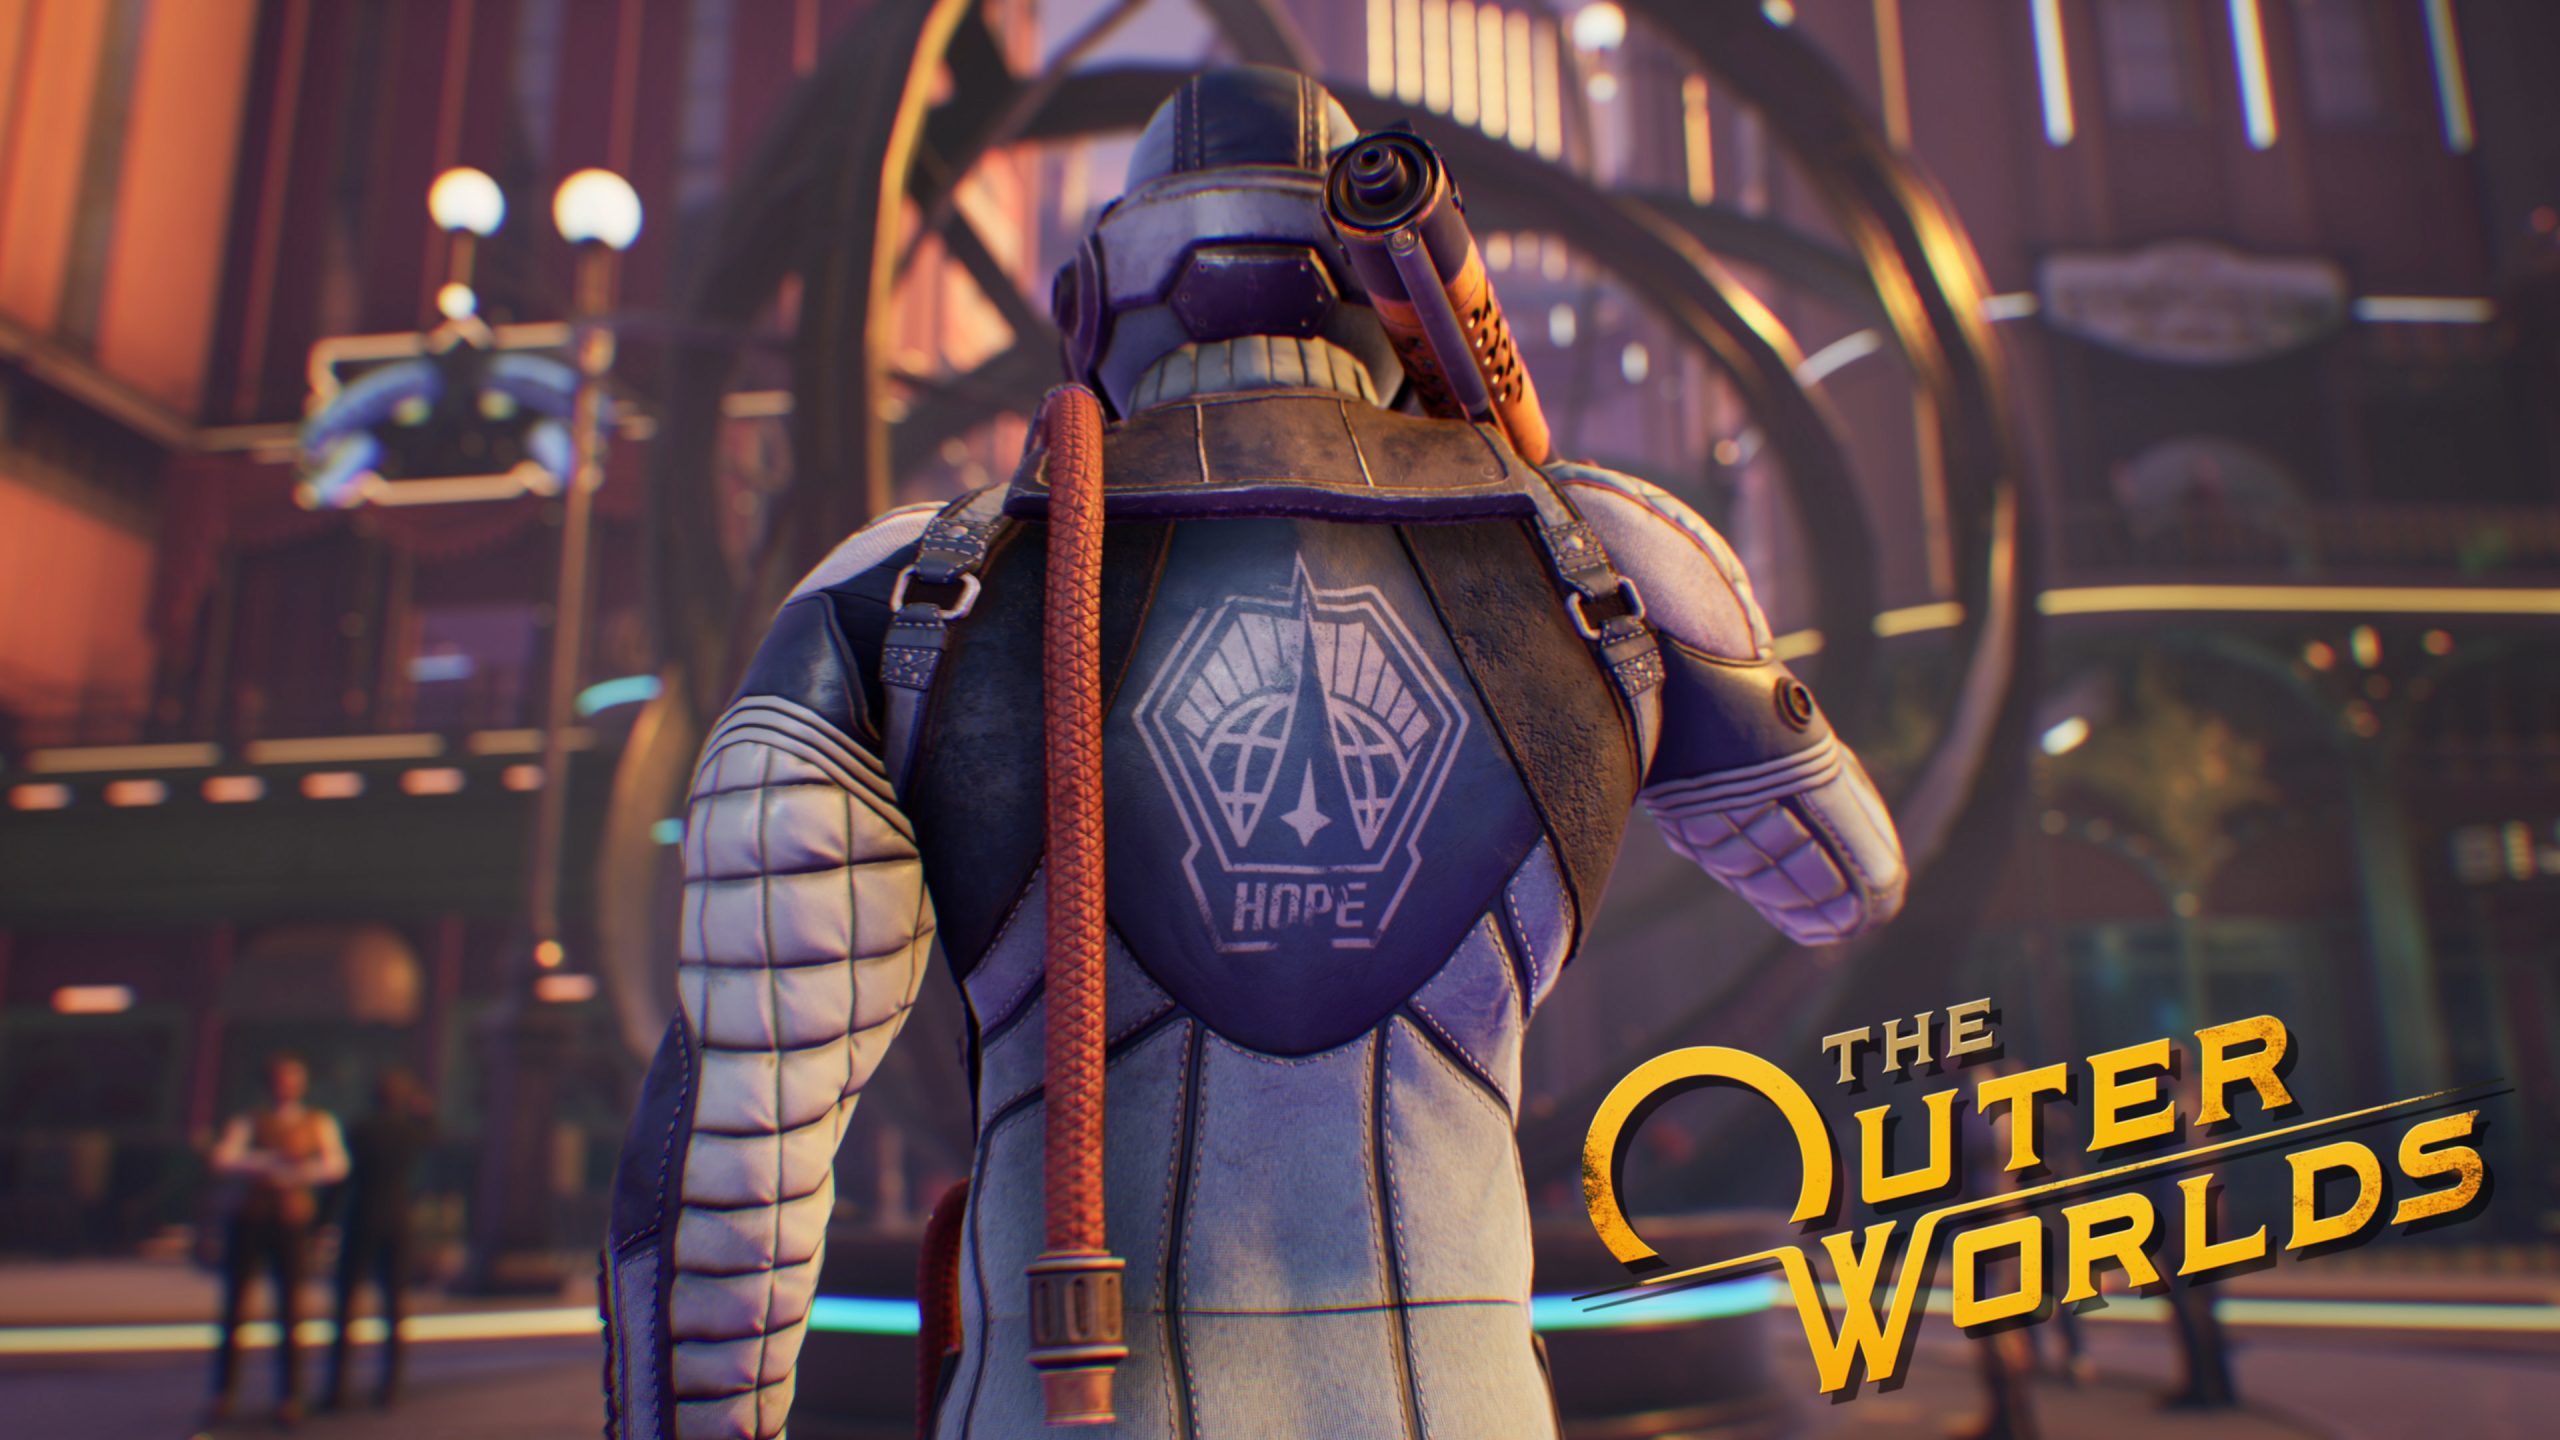 The Outer Worlds Obsidian Game of the Year Award 2019